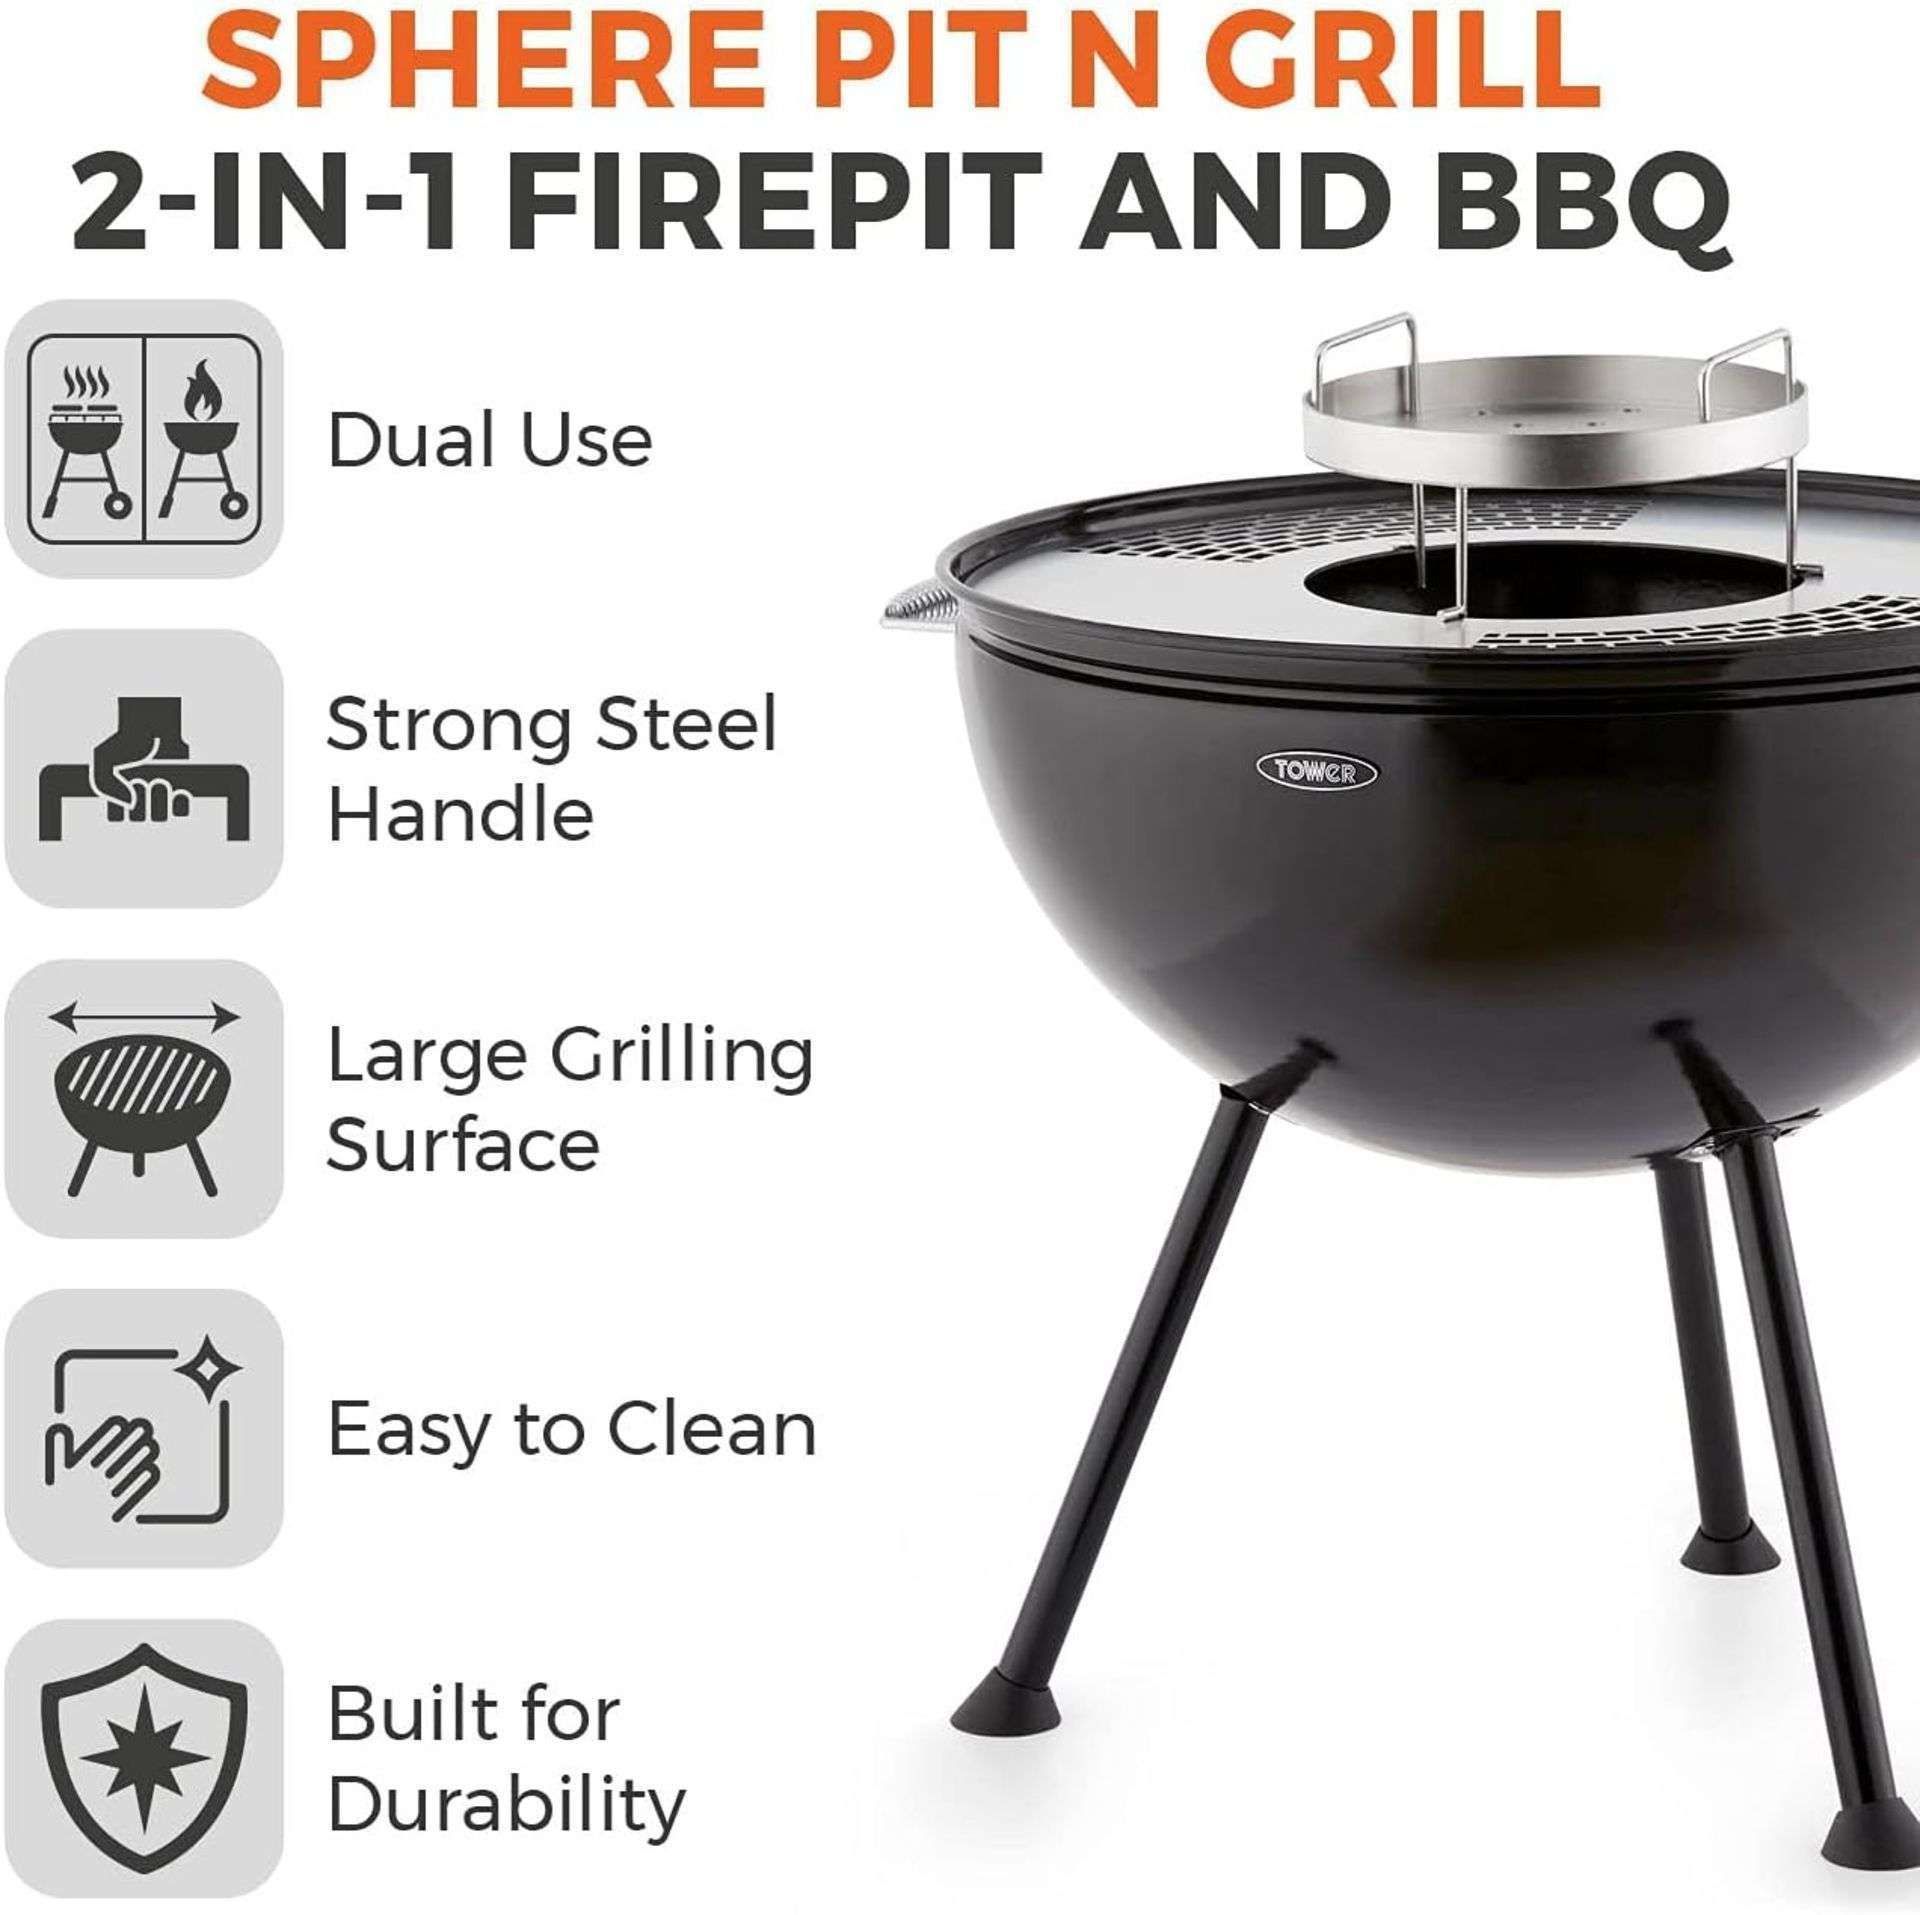 Brand New Tower Sphere Fire Pit and BBQ Grill, Black, DUAL USE â€“ This multi-functional pit n grill - Bild 2 aus 5